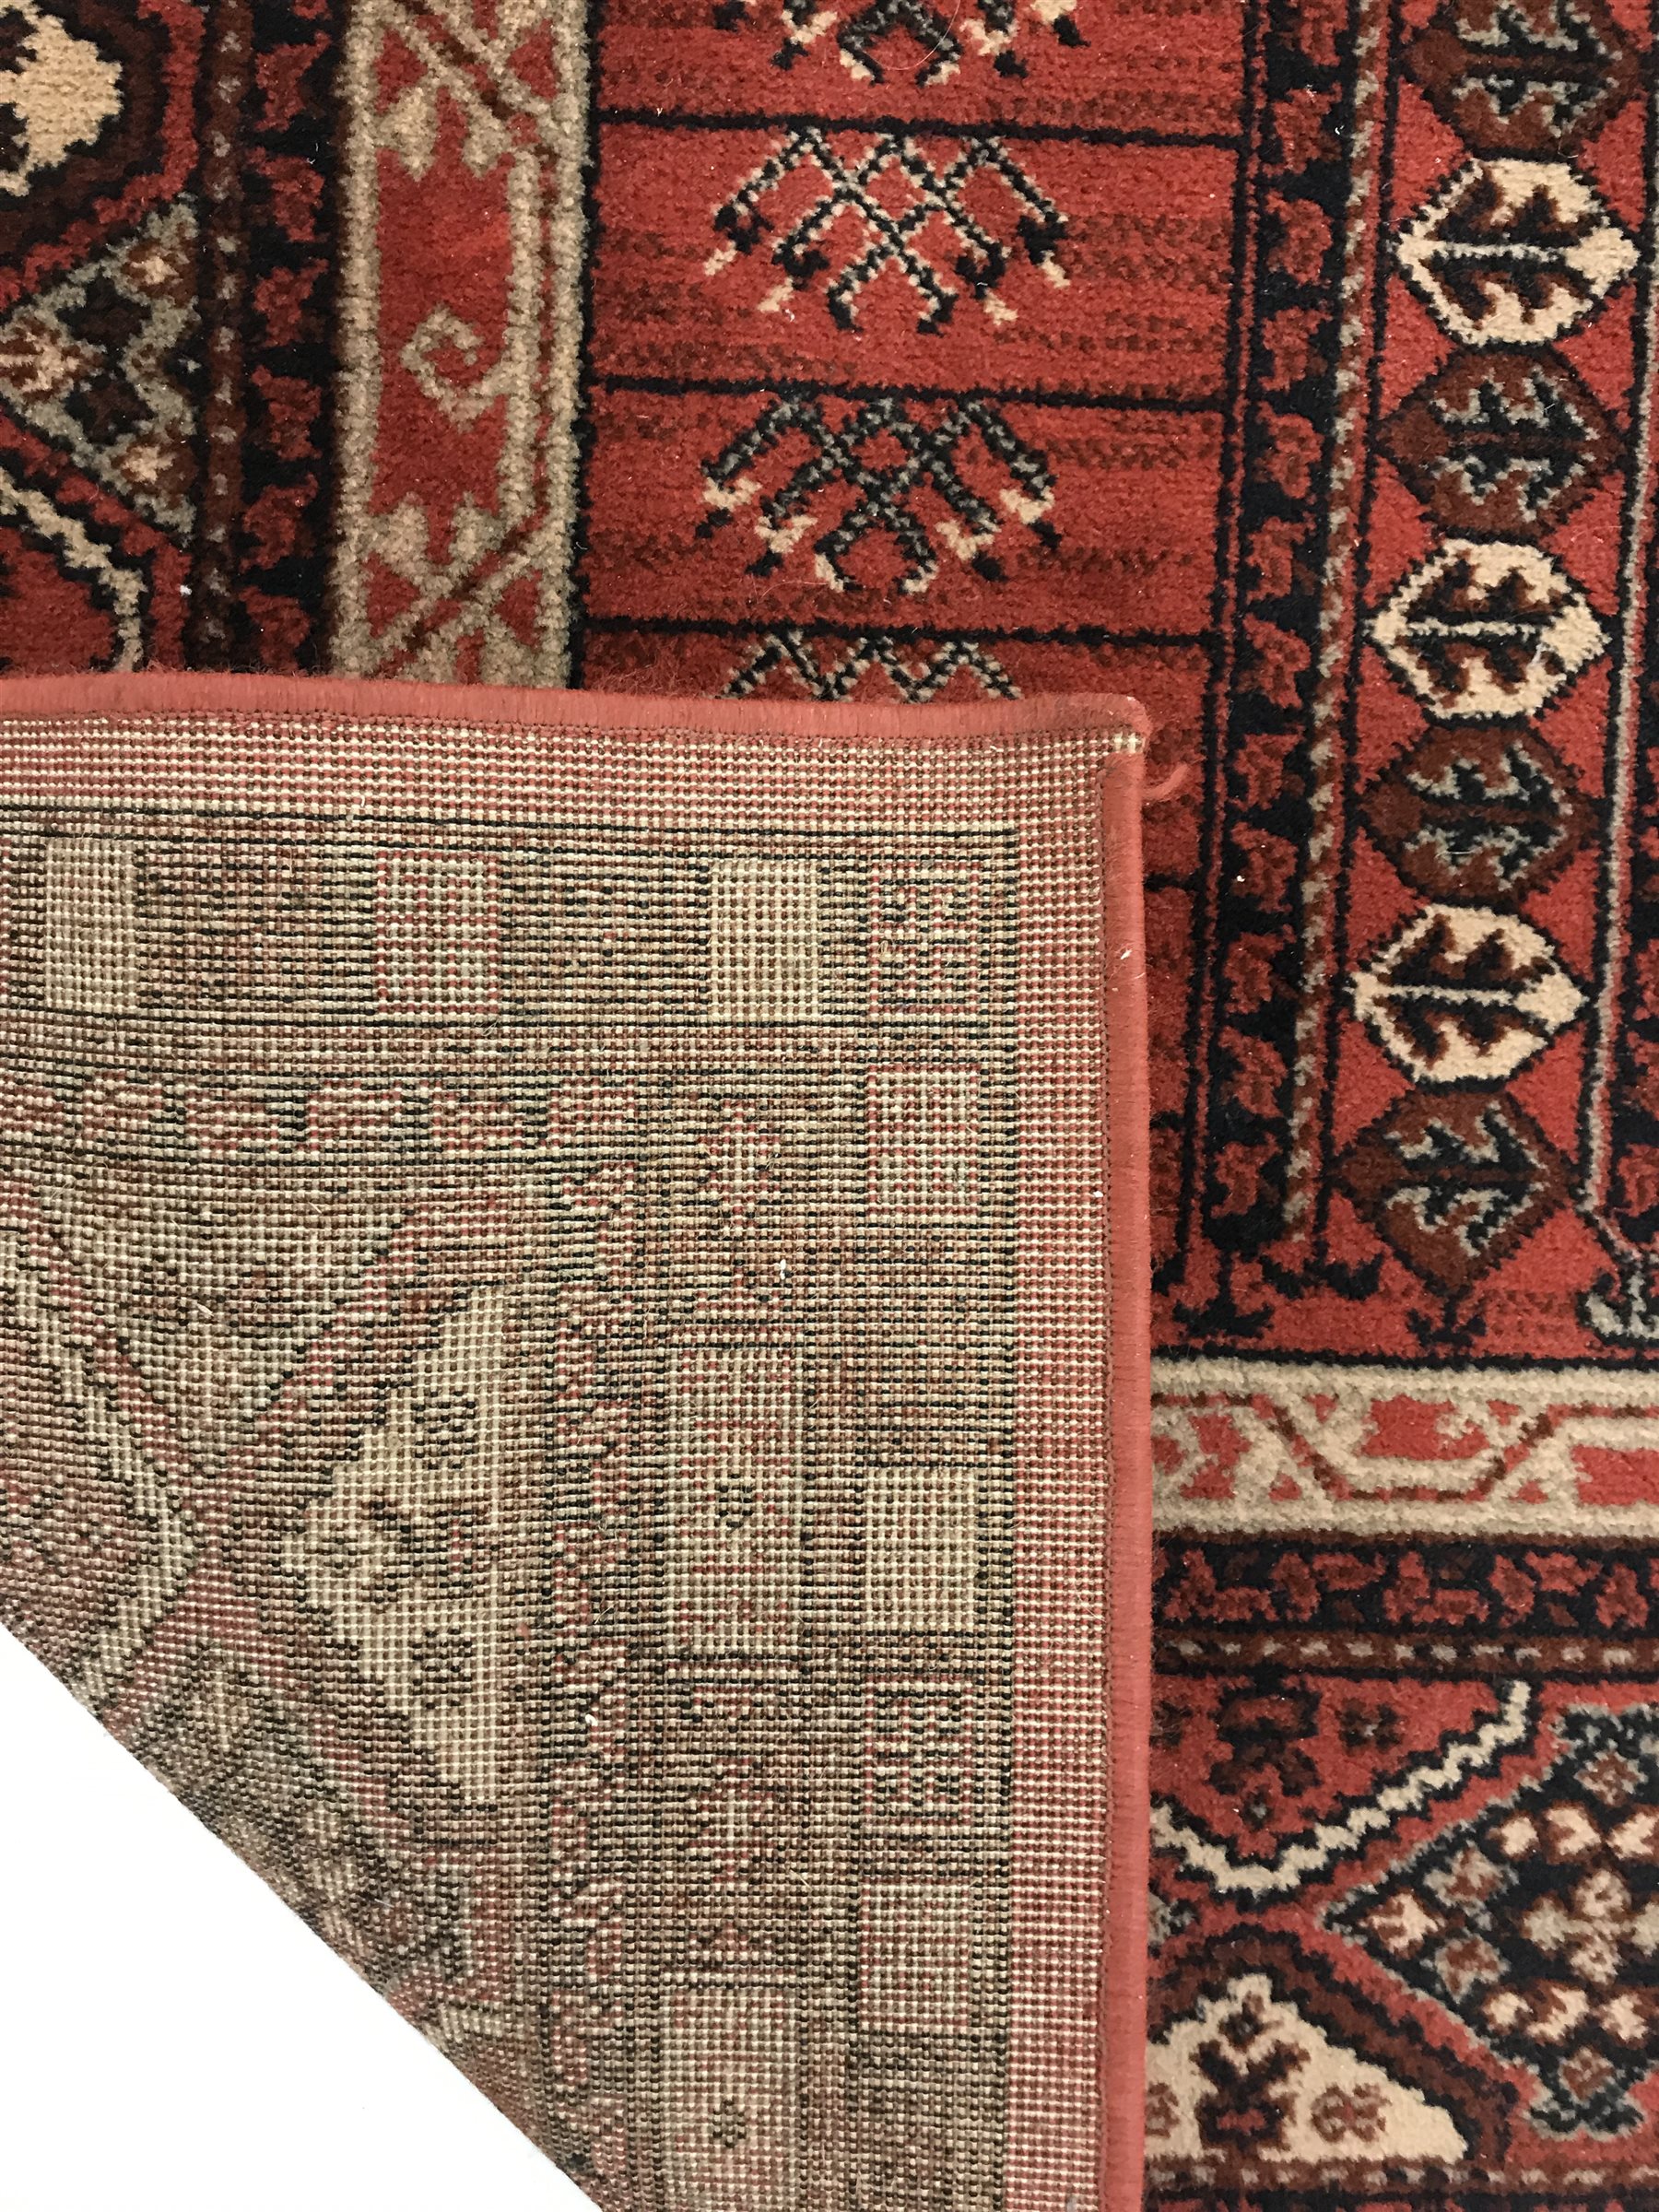 Persian design red ground rug, repeating border, 190cm x 137cm - Image 4 of 6